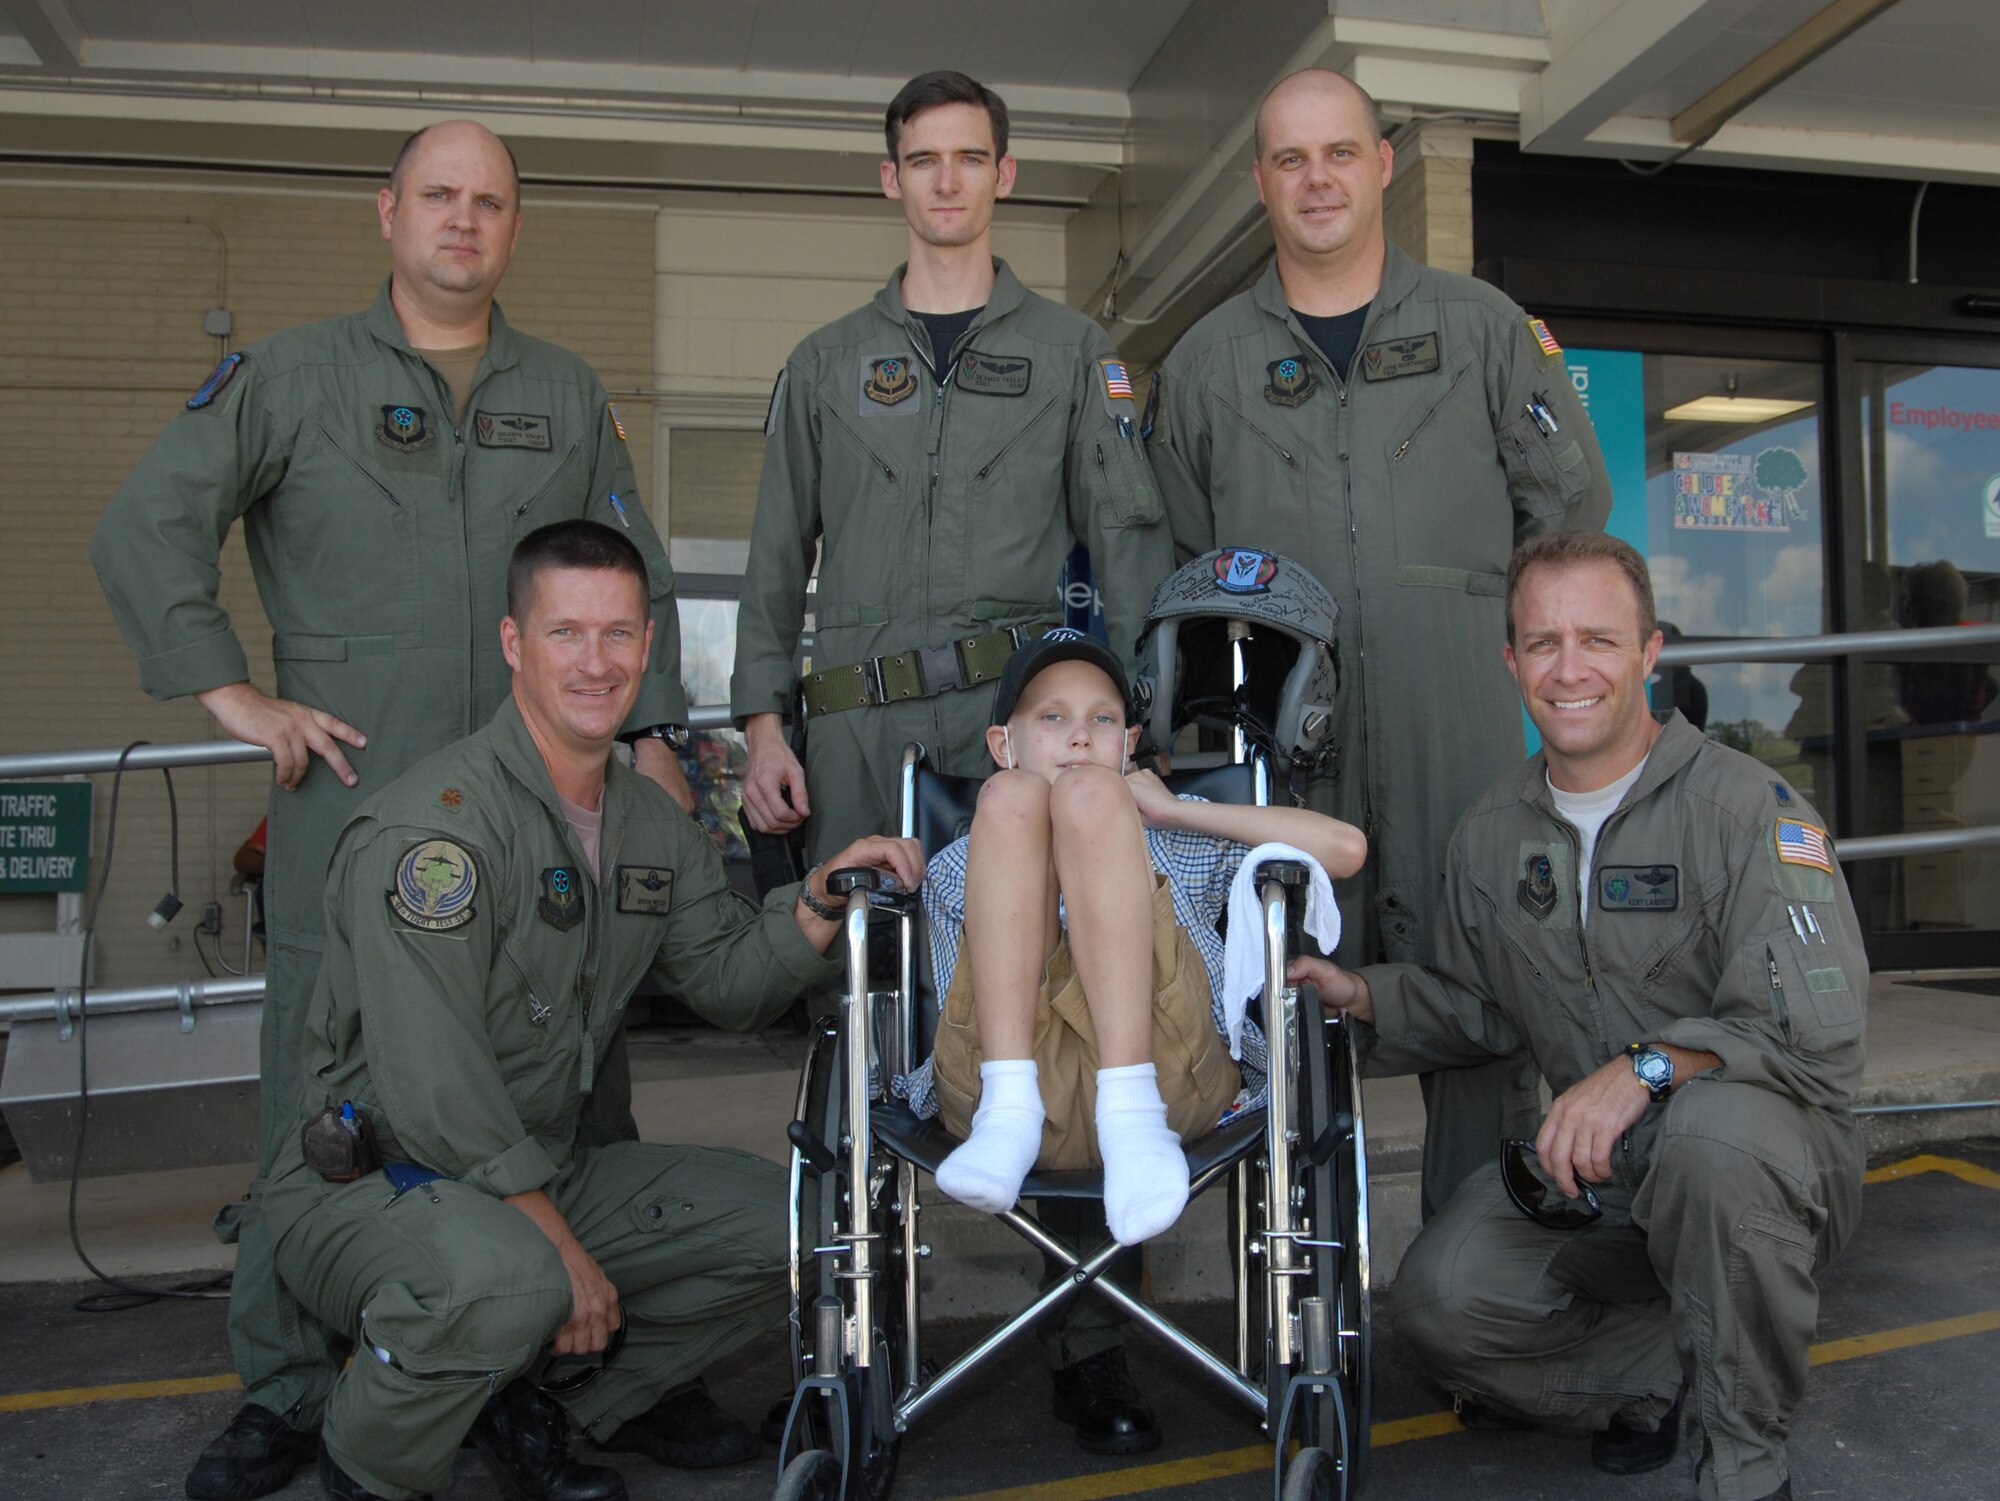 MOBILE, AL-- Christian Prockupski poses with (back; left to right)Tech. Sgt. Shawn Swift, Staff Sgt. Seamus Feeley and Tech. Sgt. John Worthington, all from the 6th Special Operations Squadron as well as (front; left to right) Maj. Brian Welch and Lt. Col. Kent Landreth, 18th Flight Test Squadron.  The crew surprised Christian by showing up to the University of Alabama Women and Children's Hospital in a UH-1 Huey helicopter, 7 Aug.  (U.S. Air Force photo by Staff Sgt. Orly N. Tyrell)